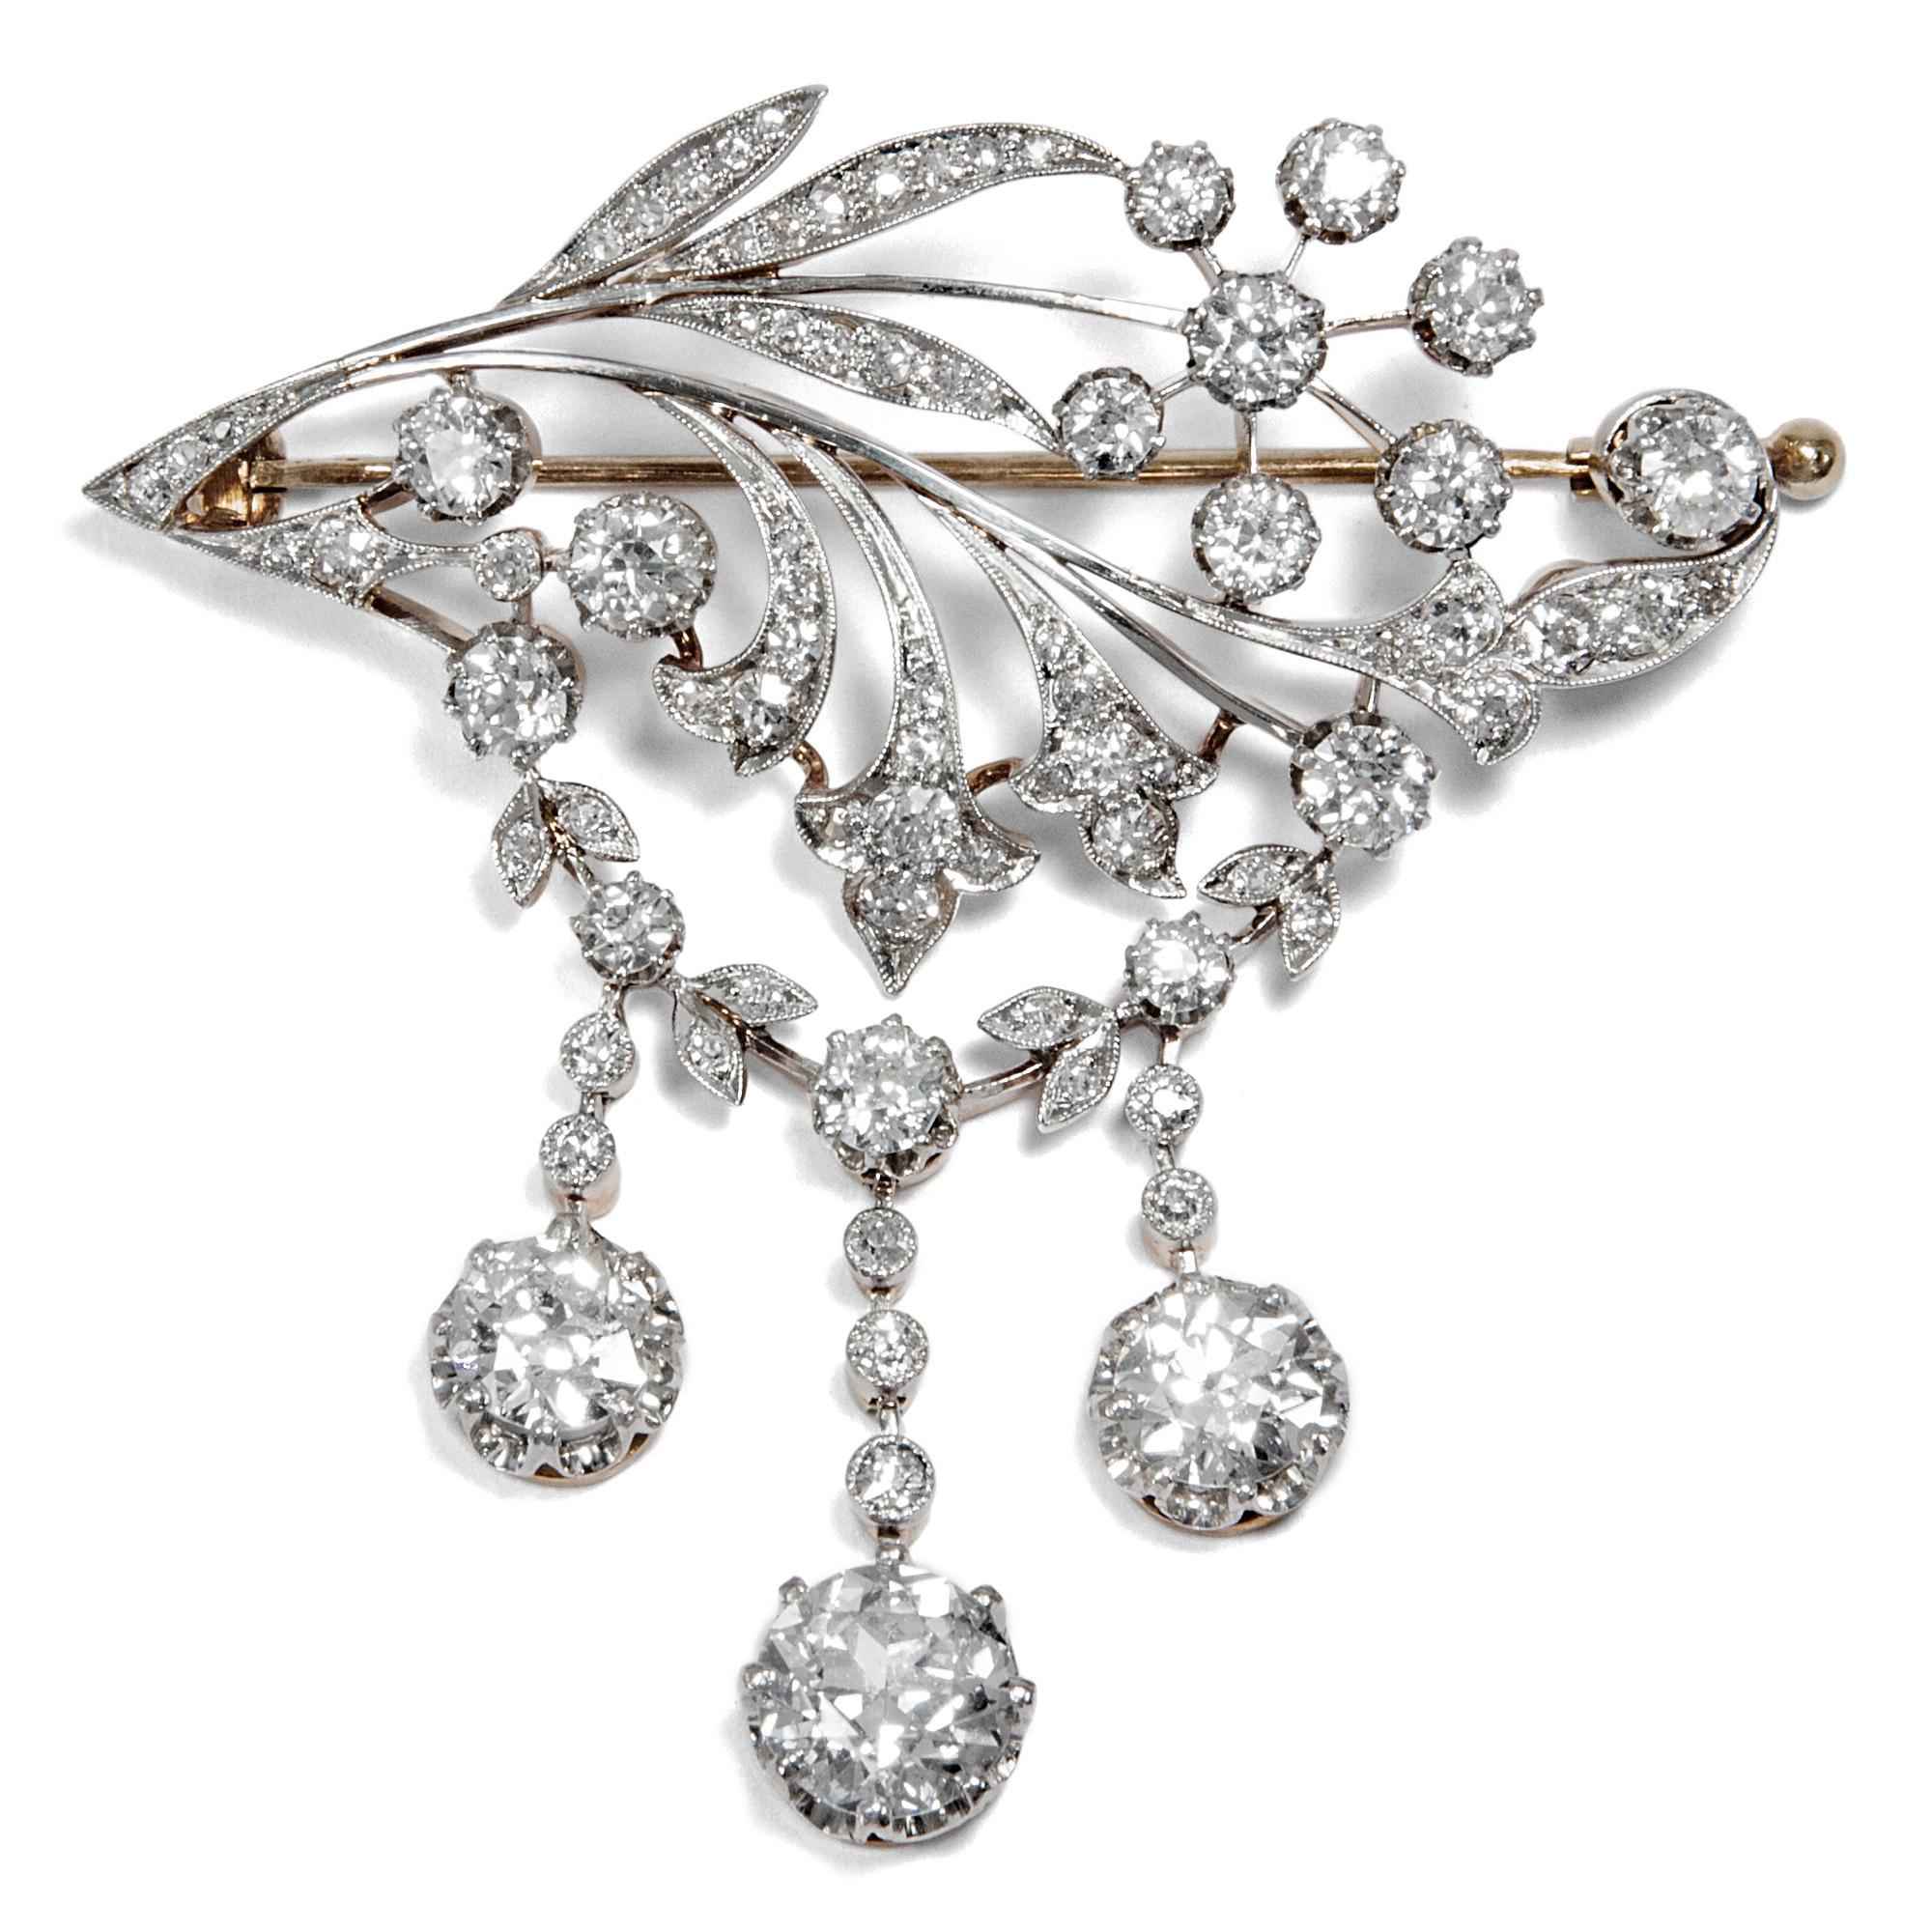 A new fashion swept across Europe from the late 19th century onwards. Jewels exclusively set with diamonds in silver or platinum on gold gleamed brightly in the new electric light, superseding older, more colourful designs.

The brooch at hand is a